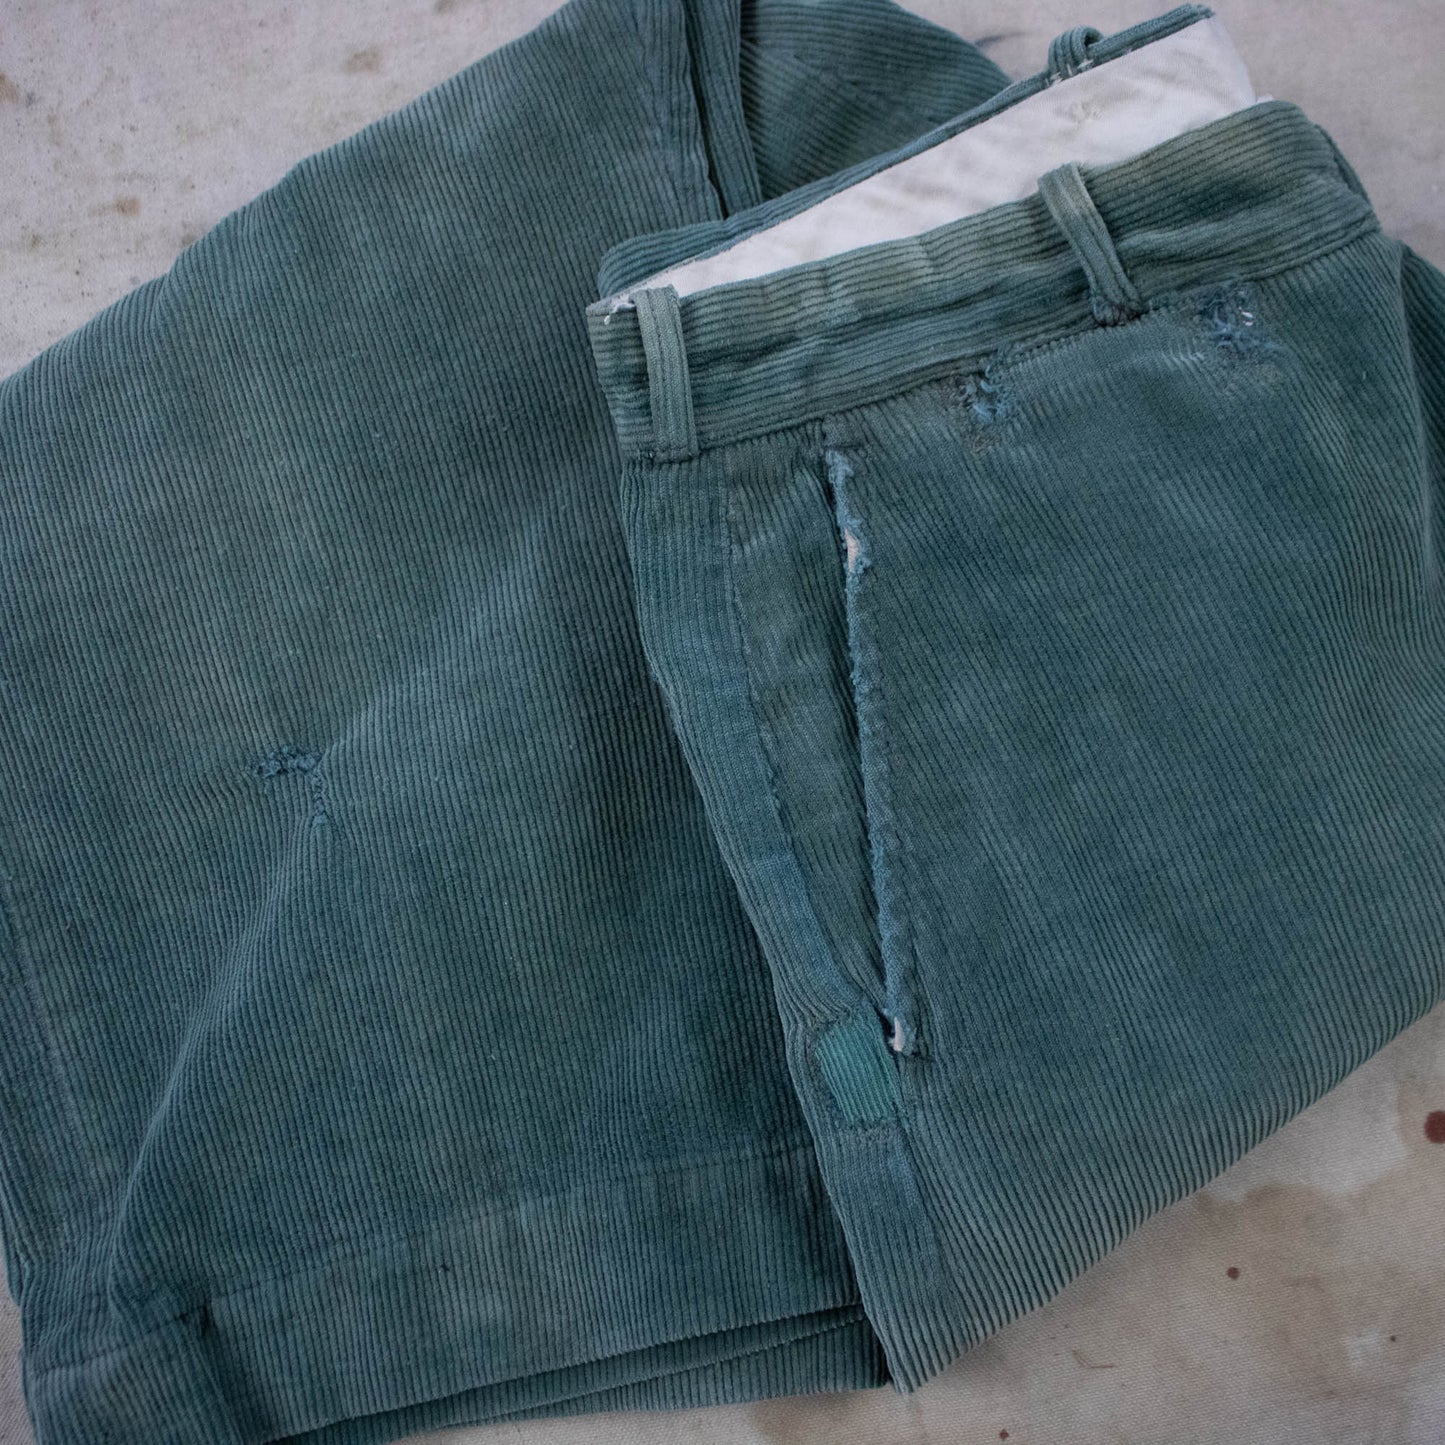 40s Teal Cords